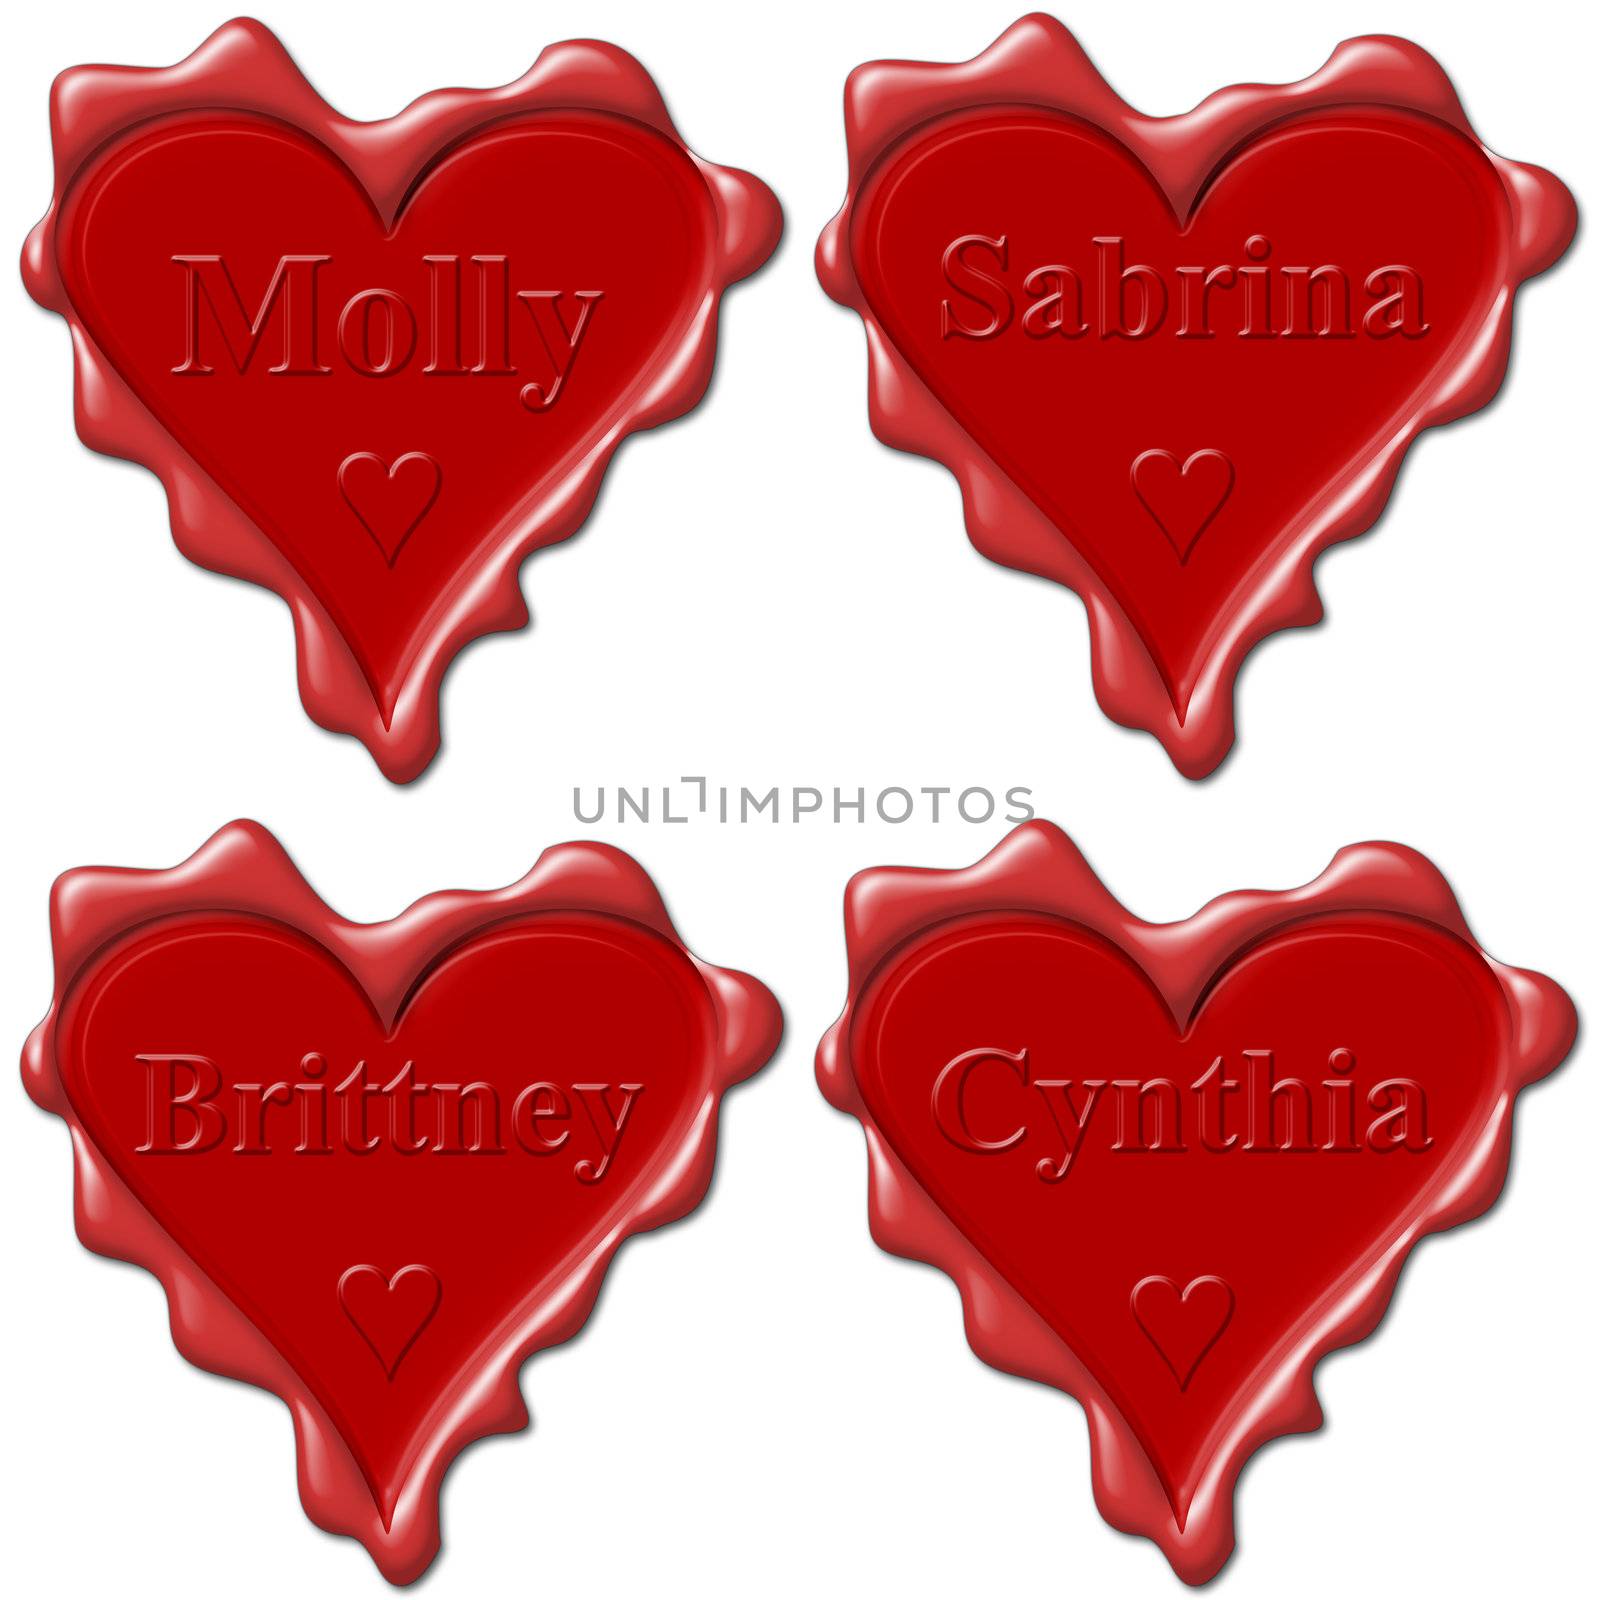 Valentine love hearts with names: Molly, Sabrina, Brittney, Cynt by mozzyb